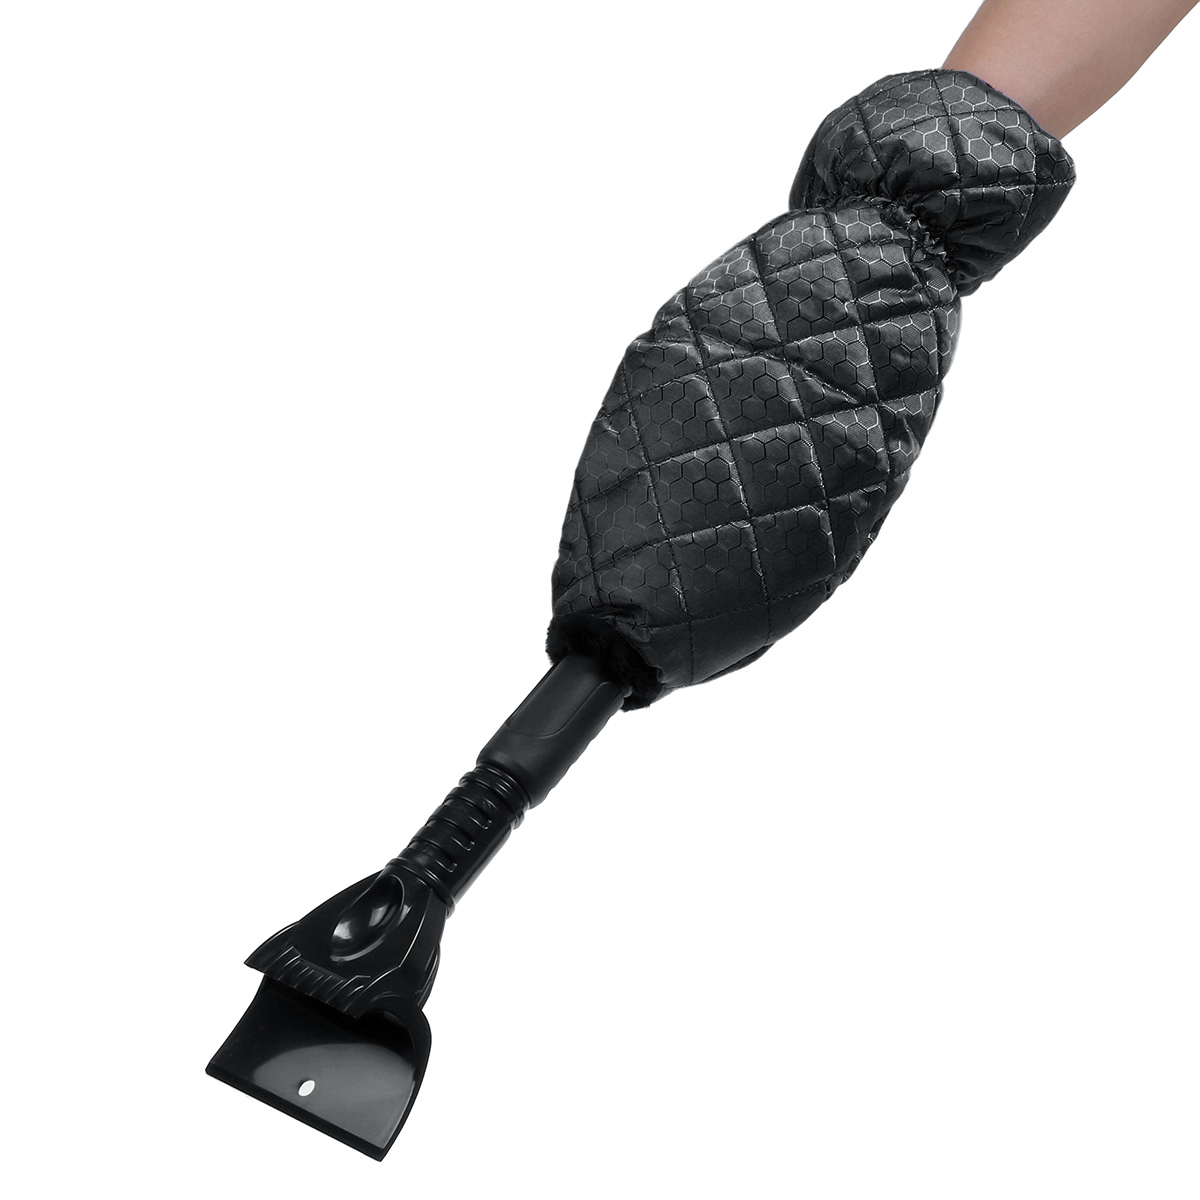 56CM-Telescopic-Rotating-Snow-Shovel-With-Gloves-Vehicle-Winter-Shoveling-Snow-Tools-1786471-11